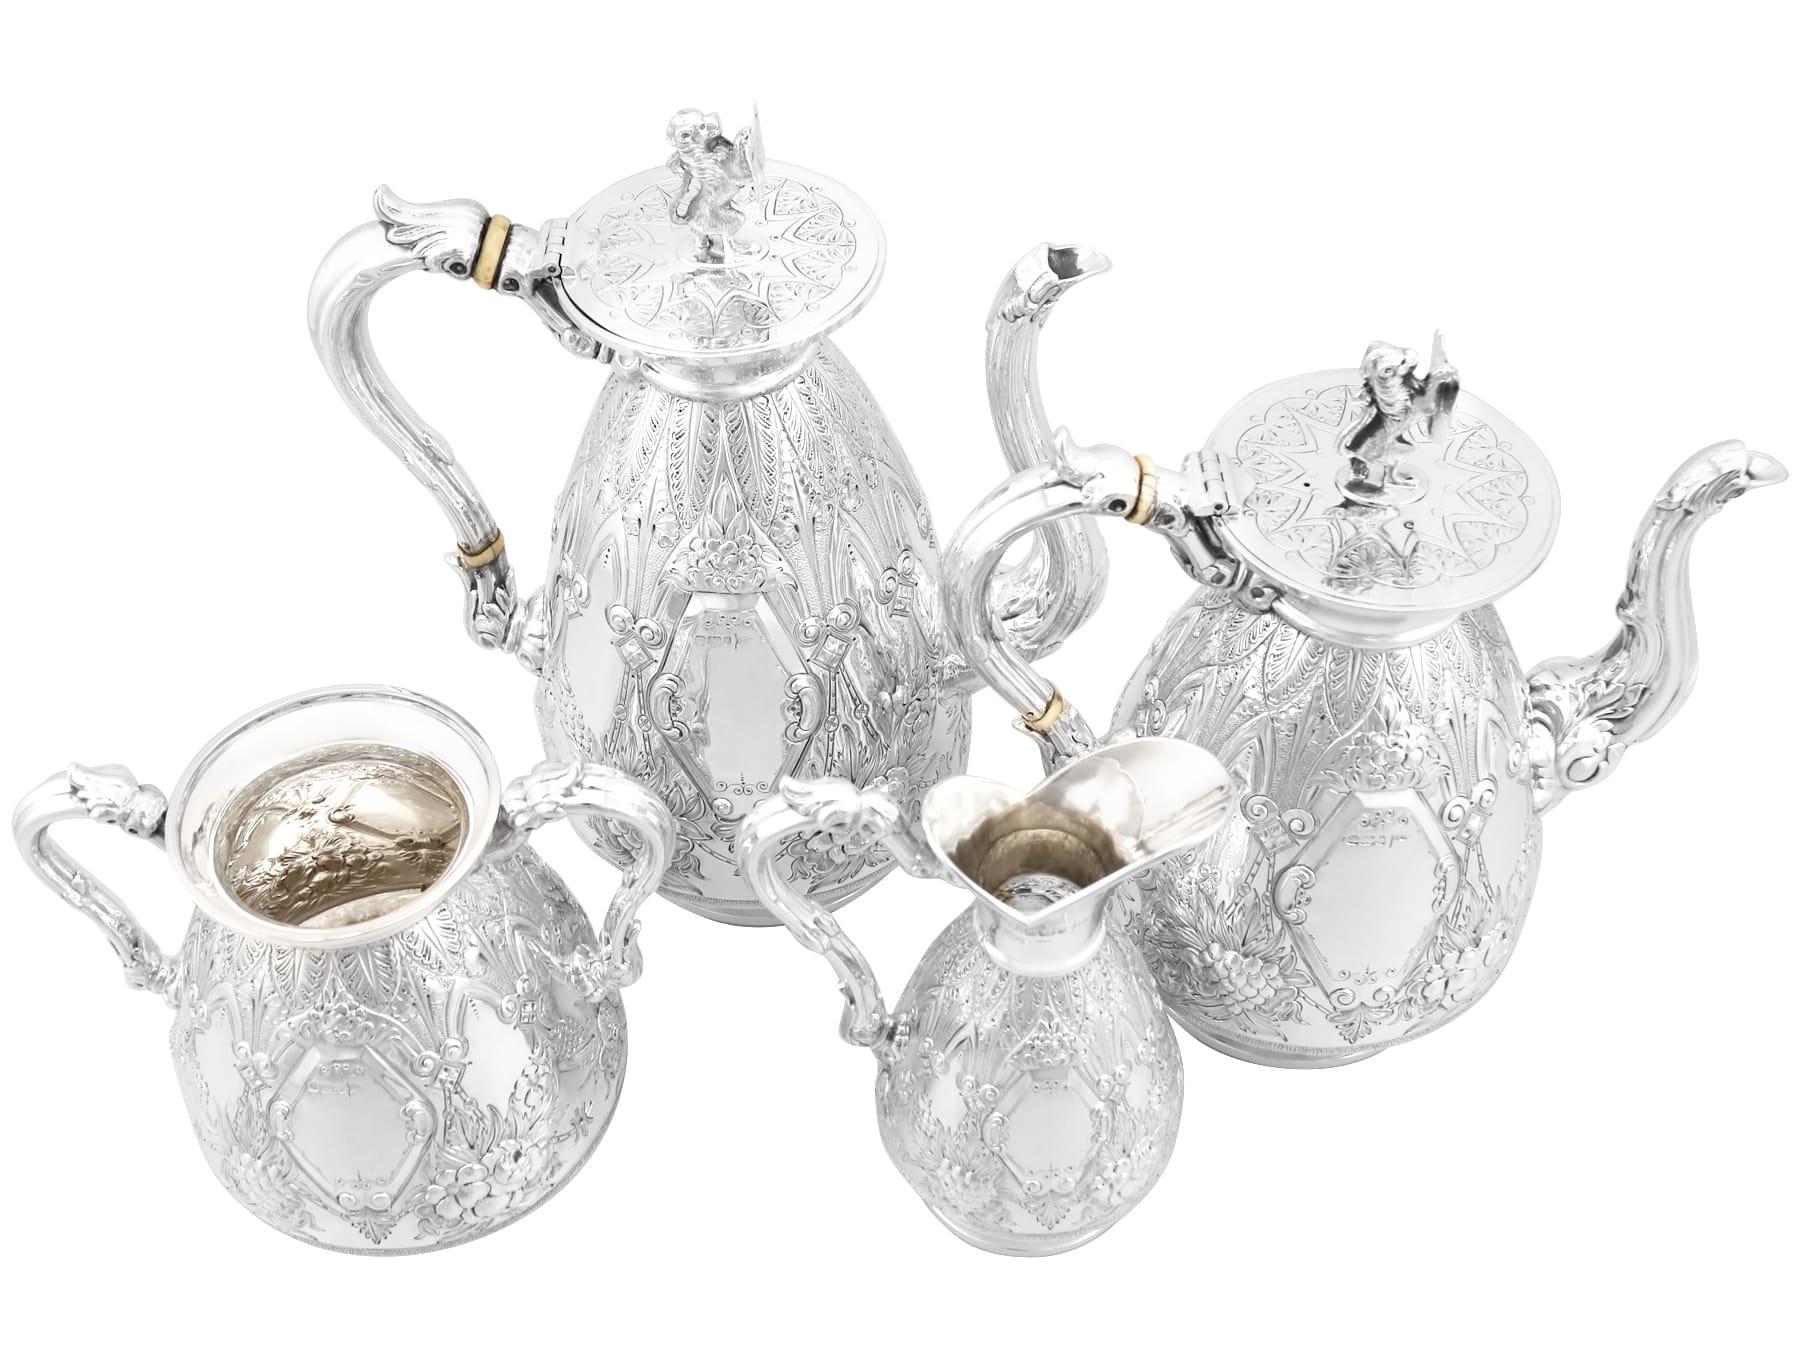 A magnificent, fine and impressive antique George V English sterling silver four piece tea and coffee set; part of our silver teaware collection.

This magnificent antique sterling silver tea and coffee set consists of a teapot, coffee pot, cream